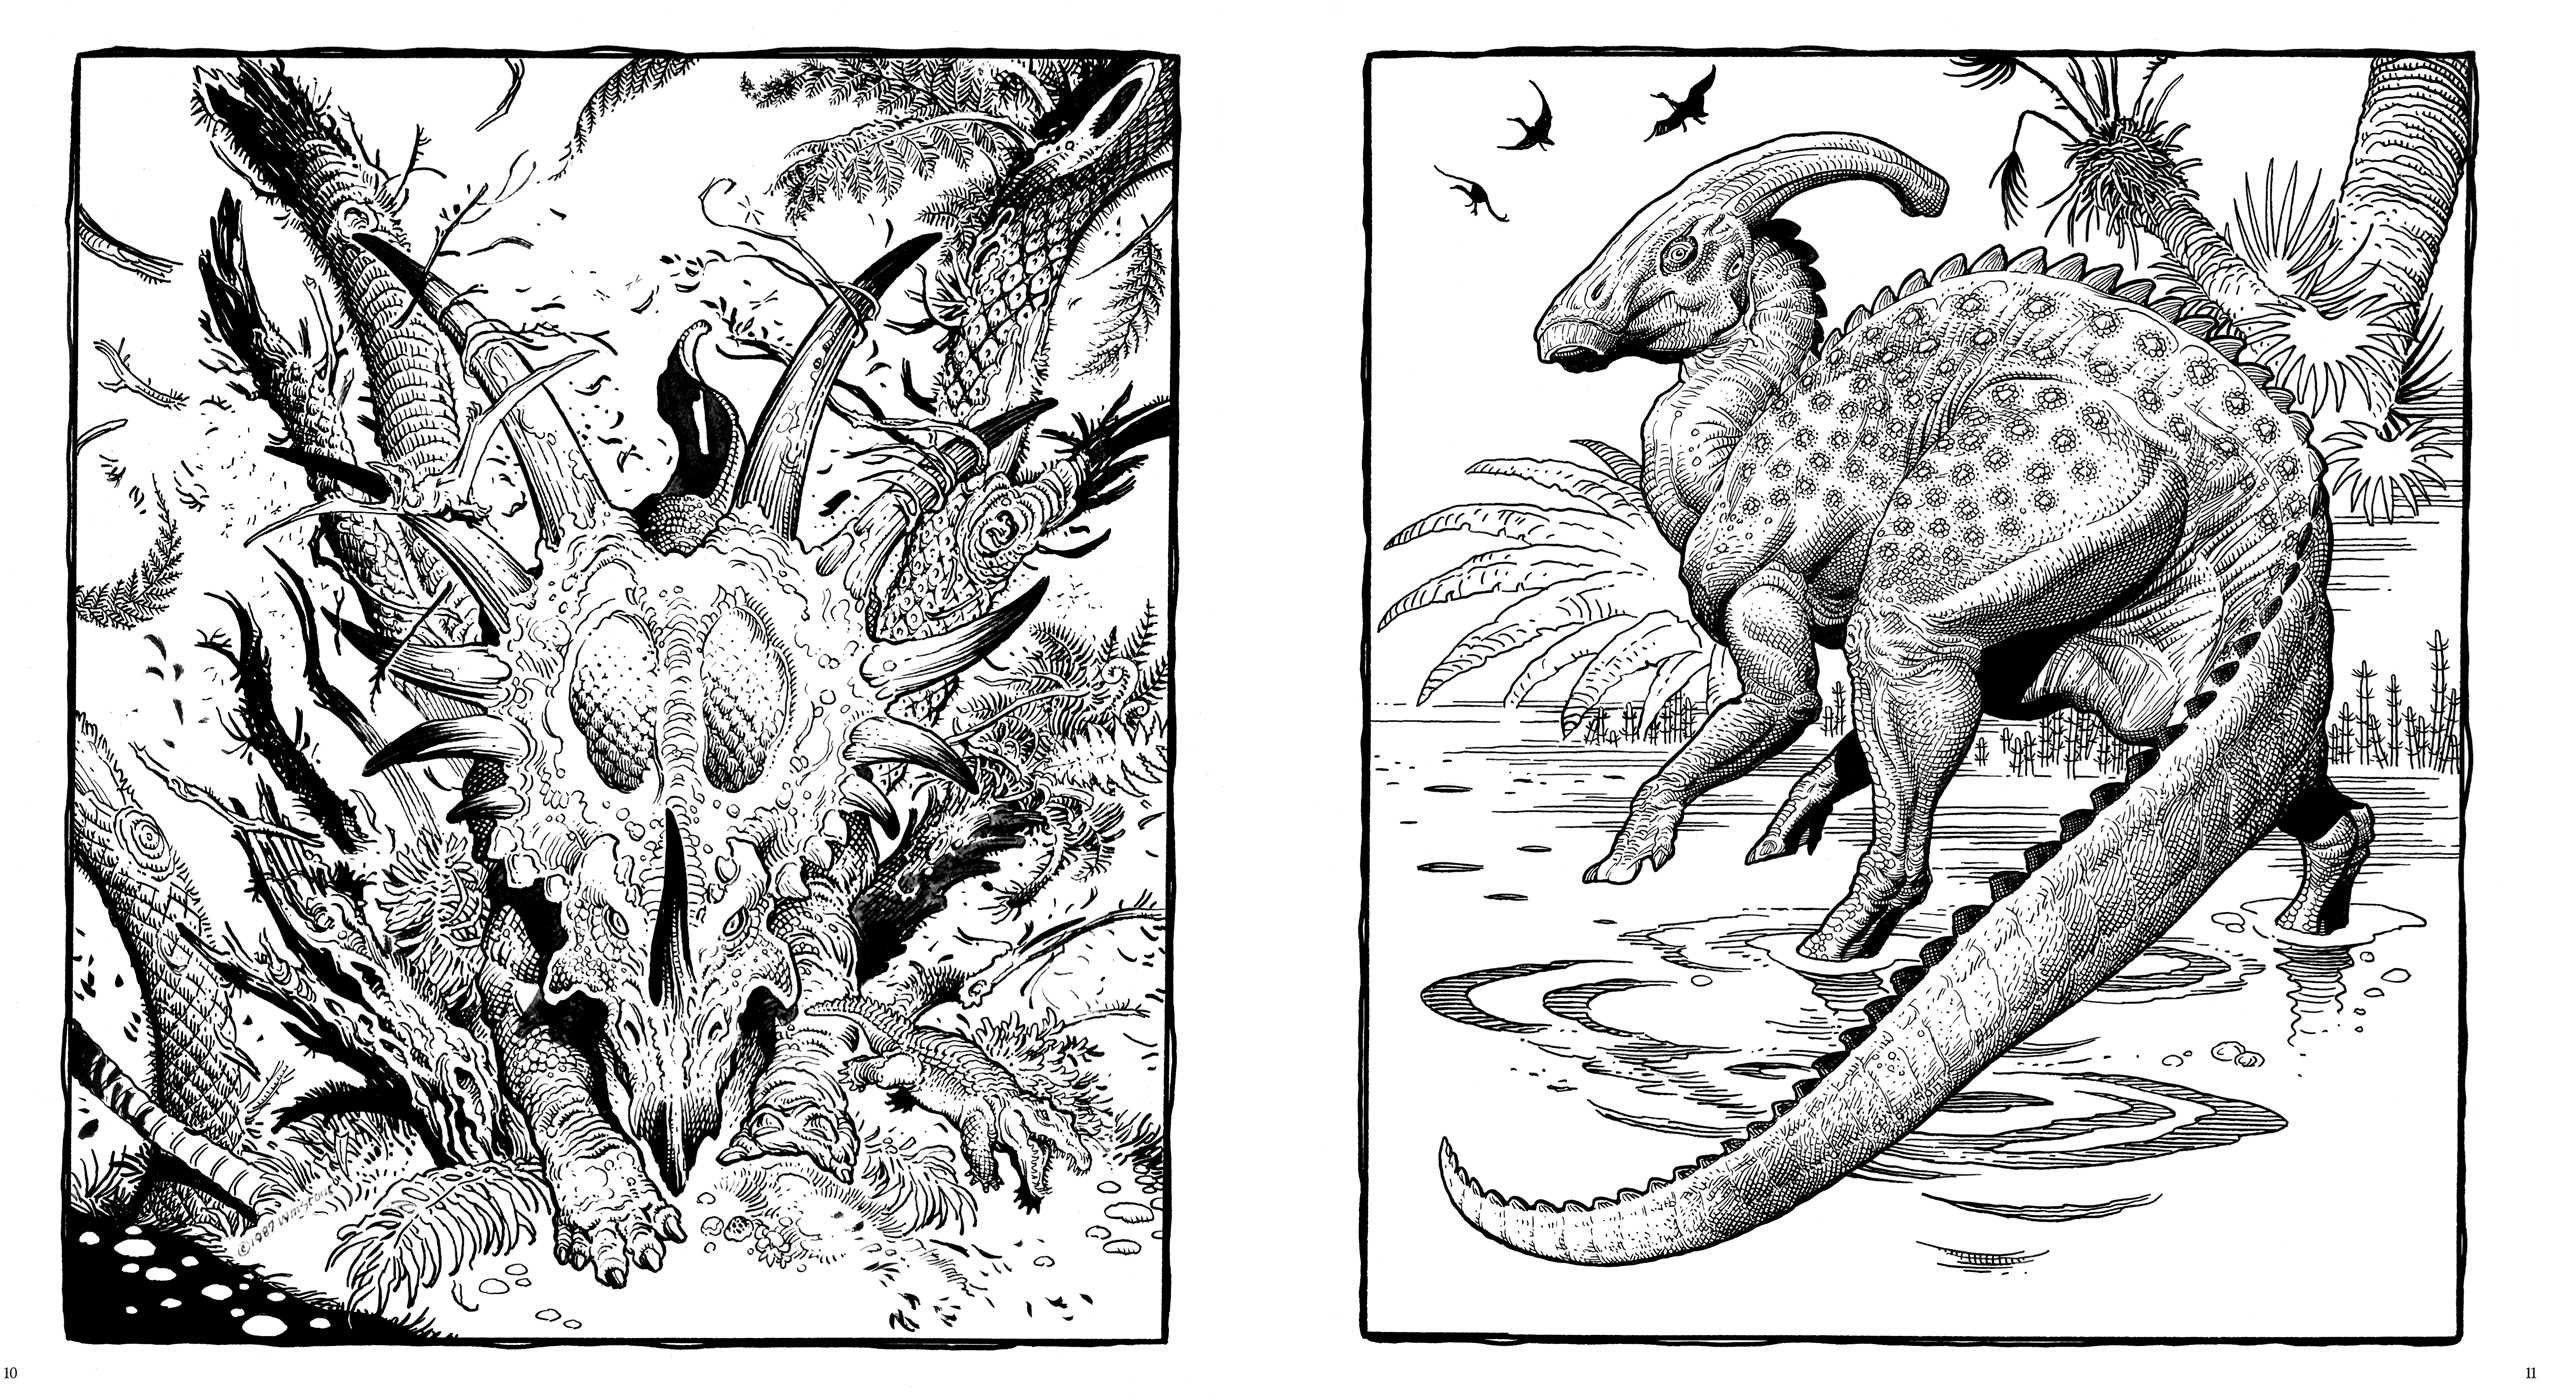 Dinosaurs A Coloring Book by William Stout